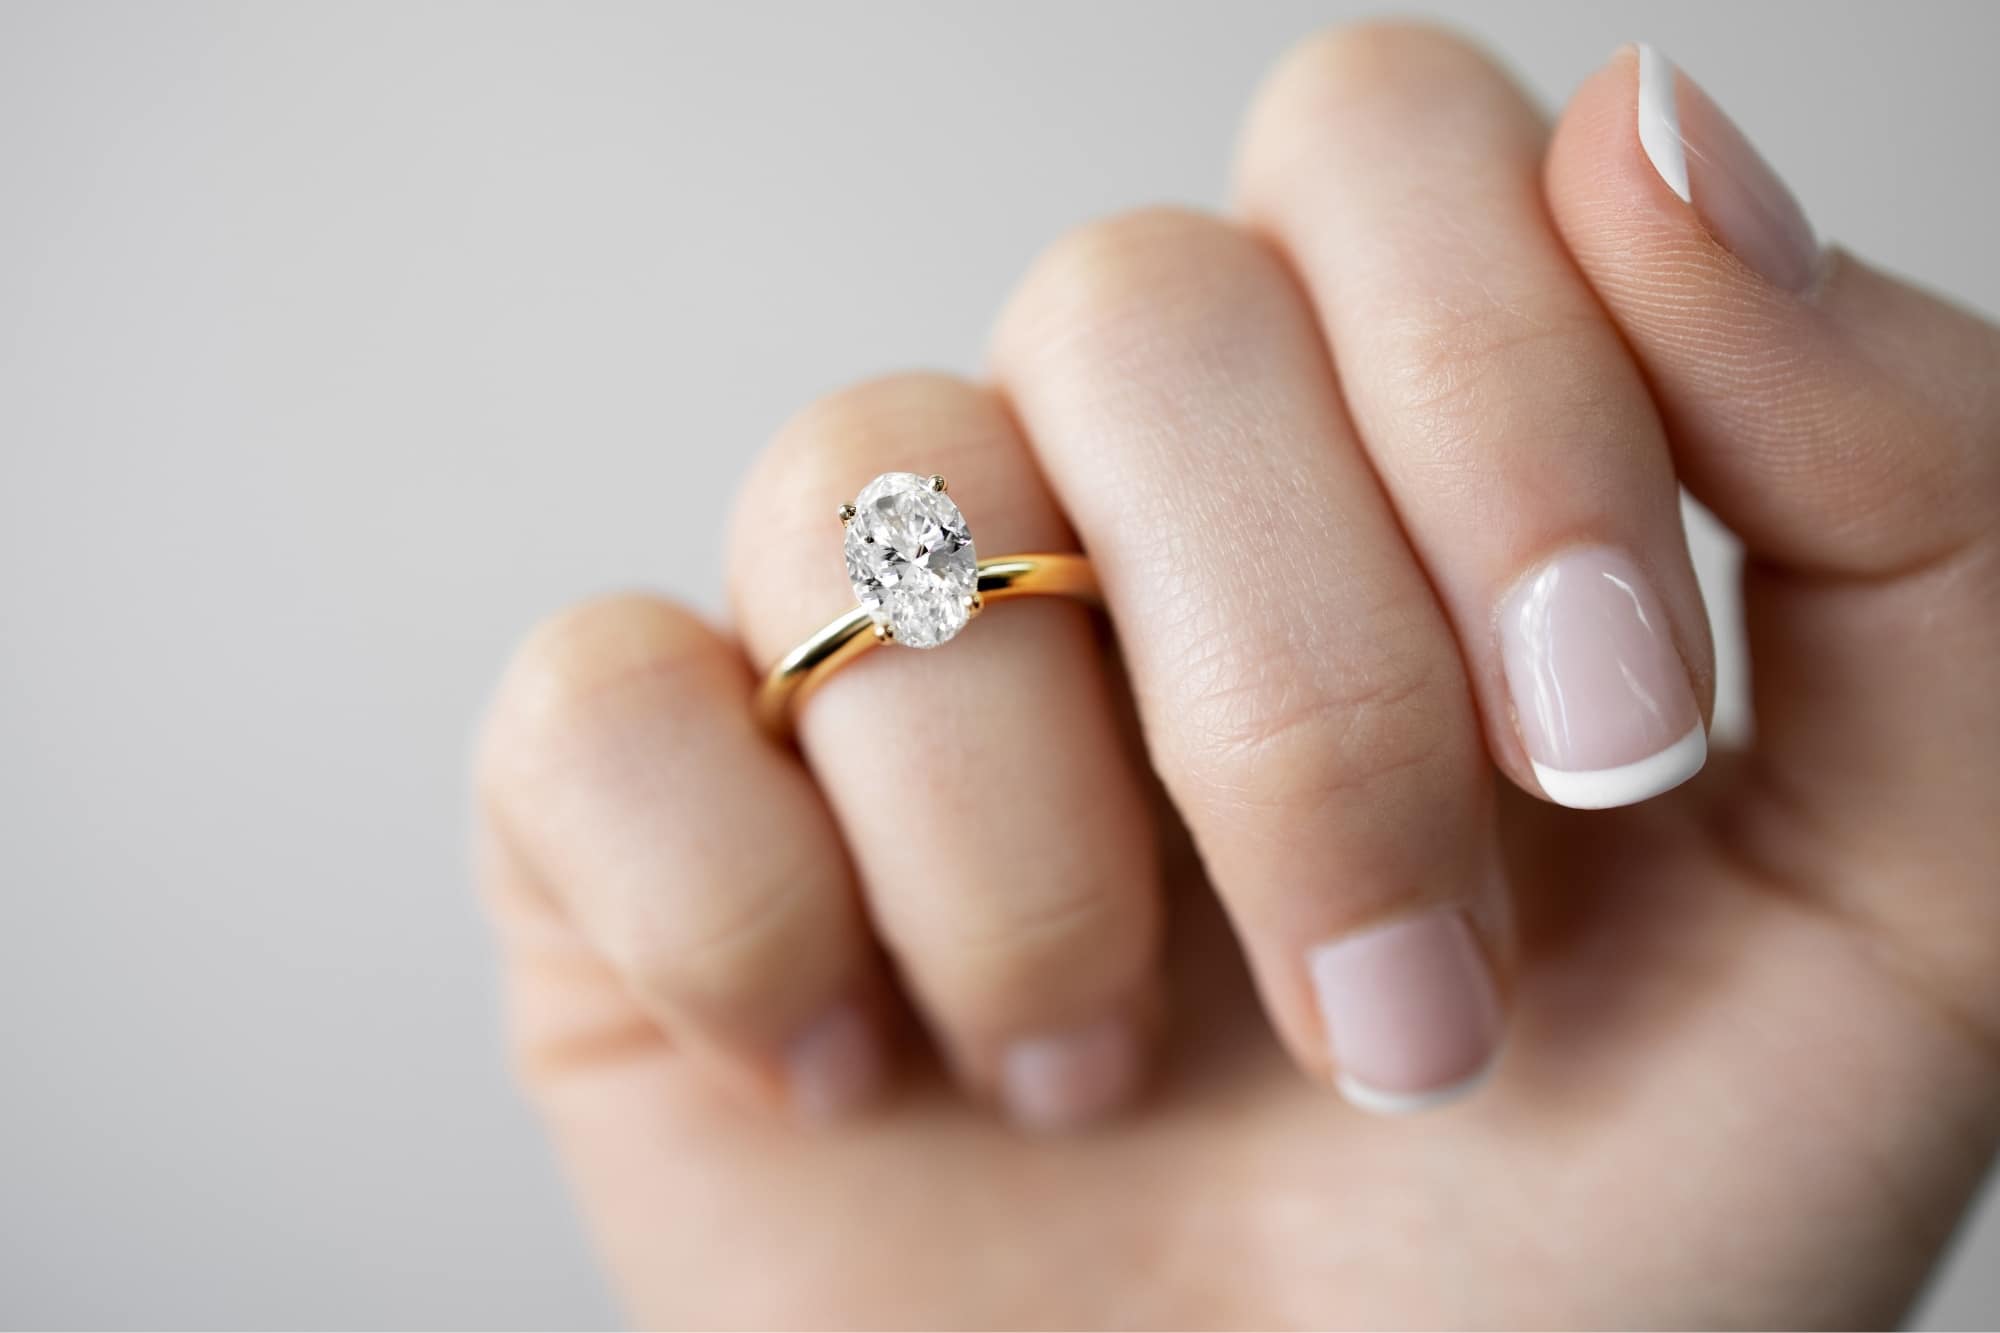 How to Buy an Engagement Ring in 5 Simple Steps